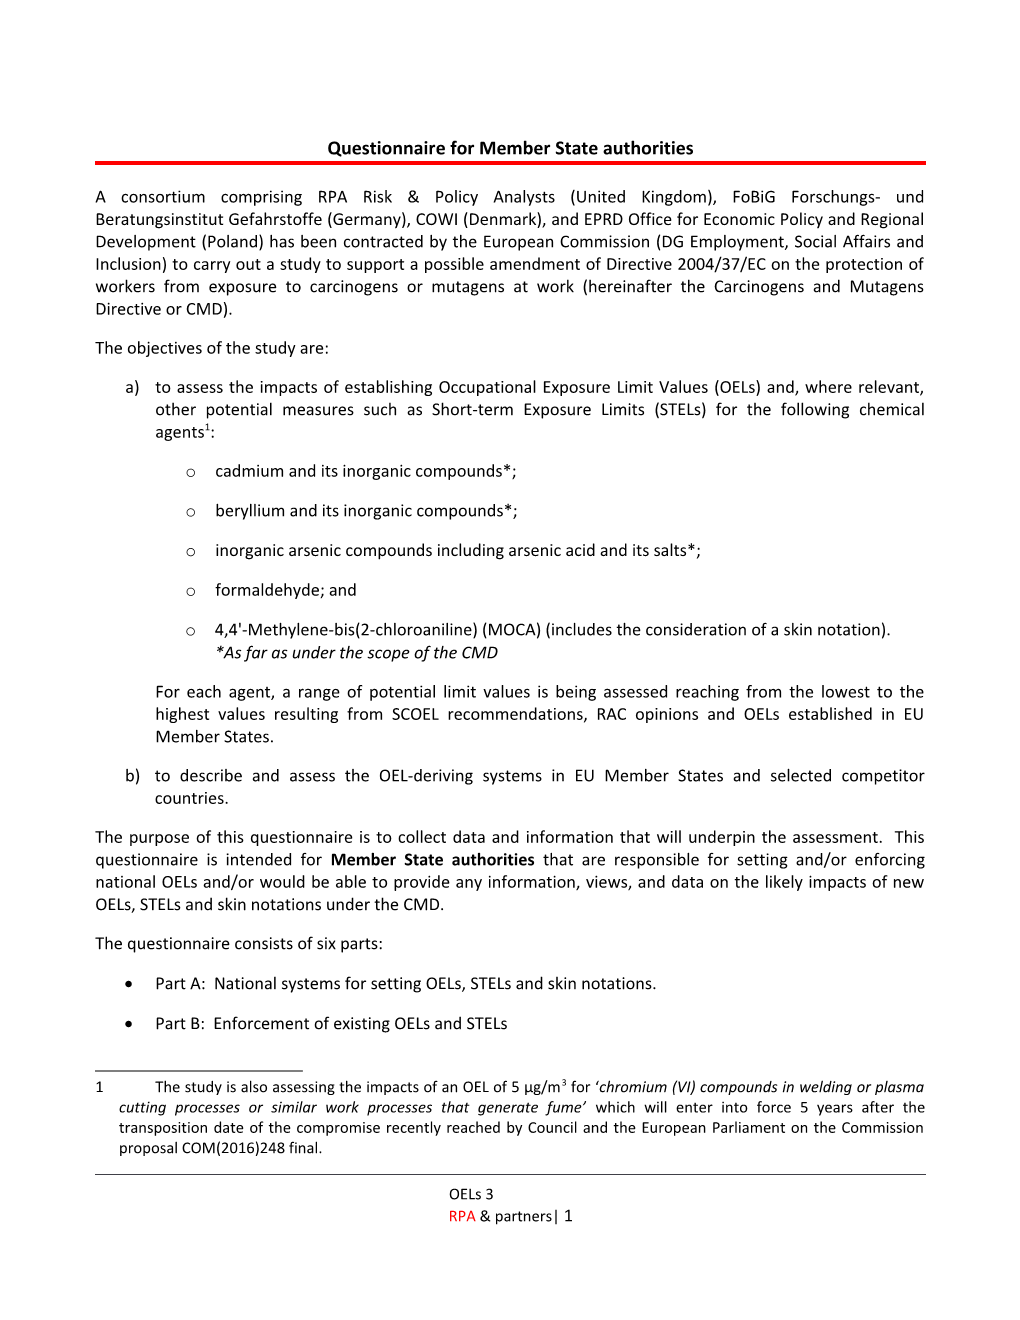 Questionnaire for Member State Authorities